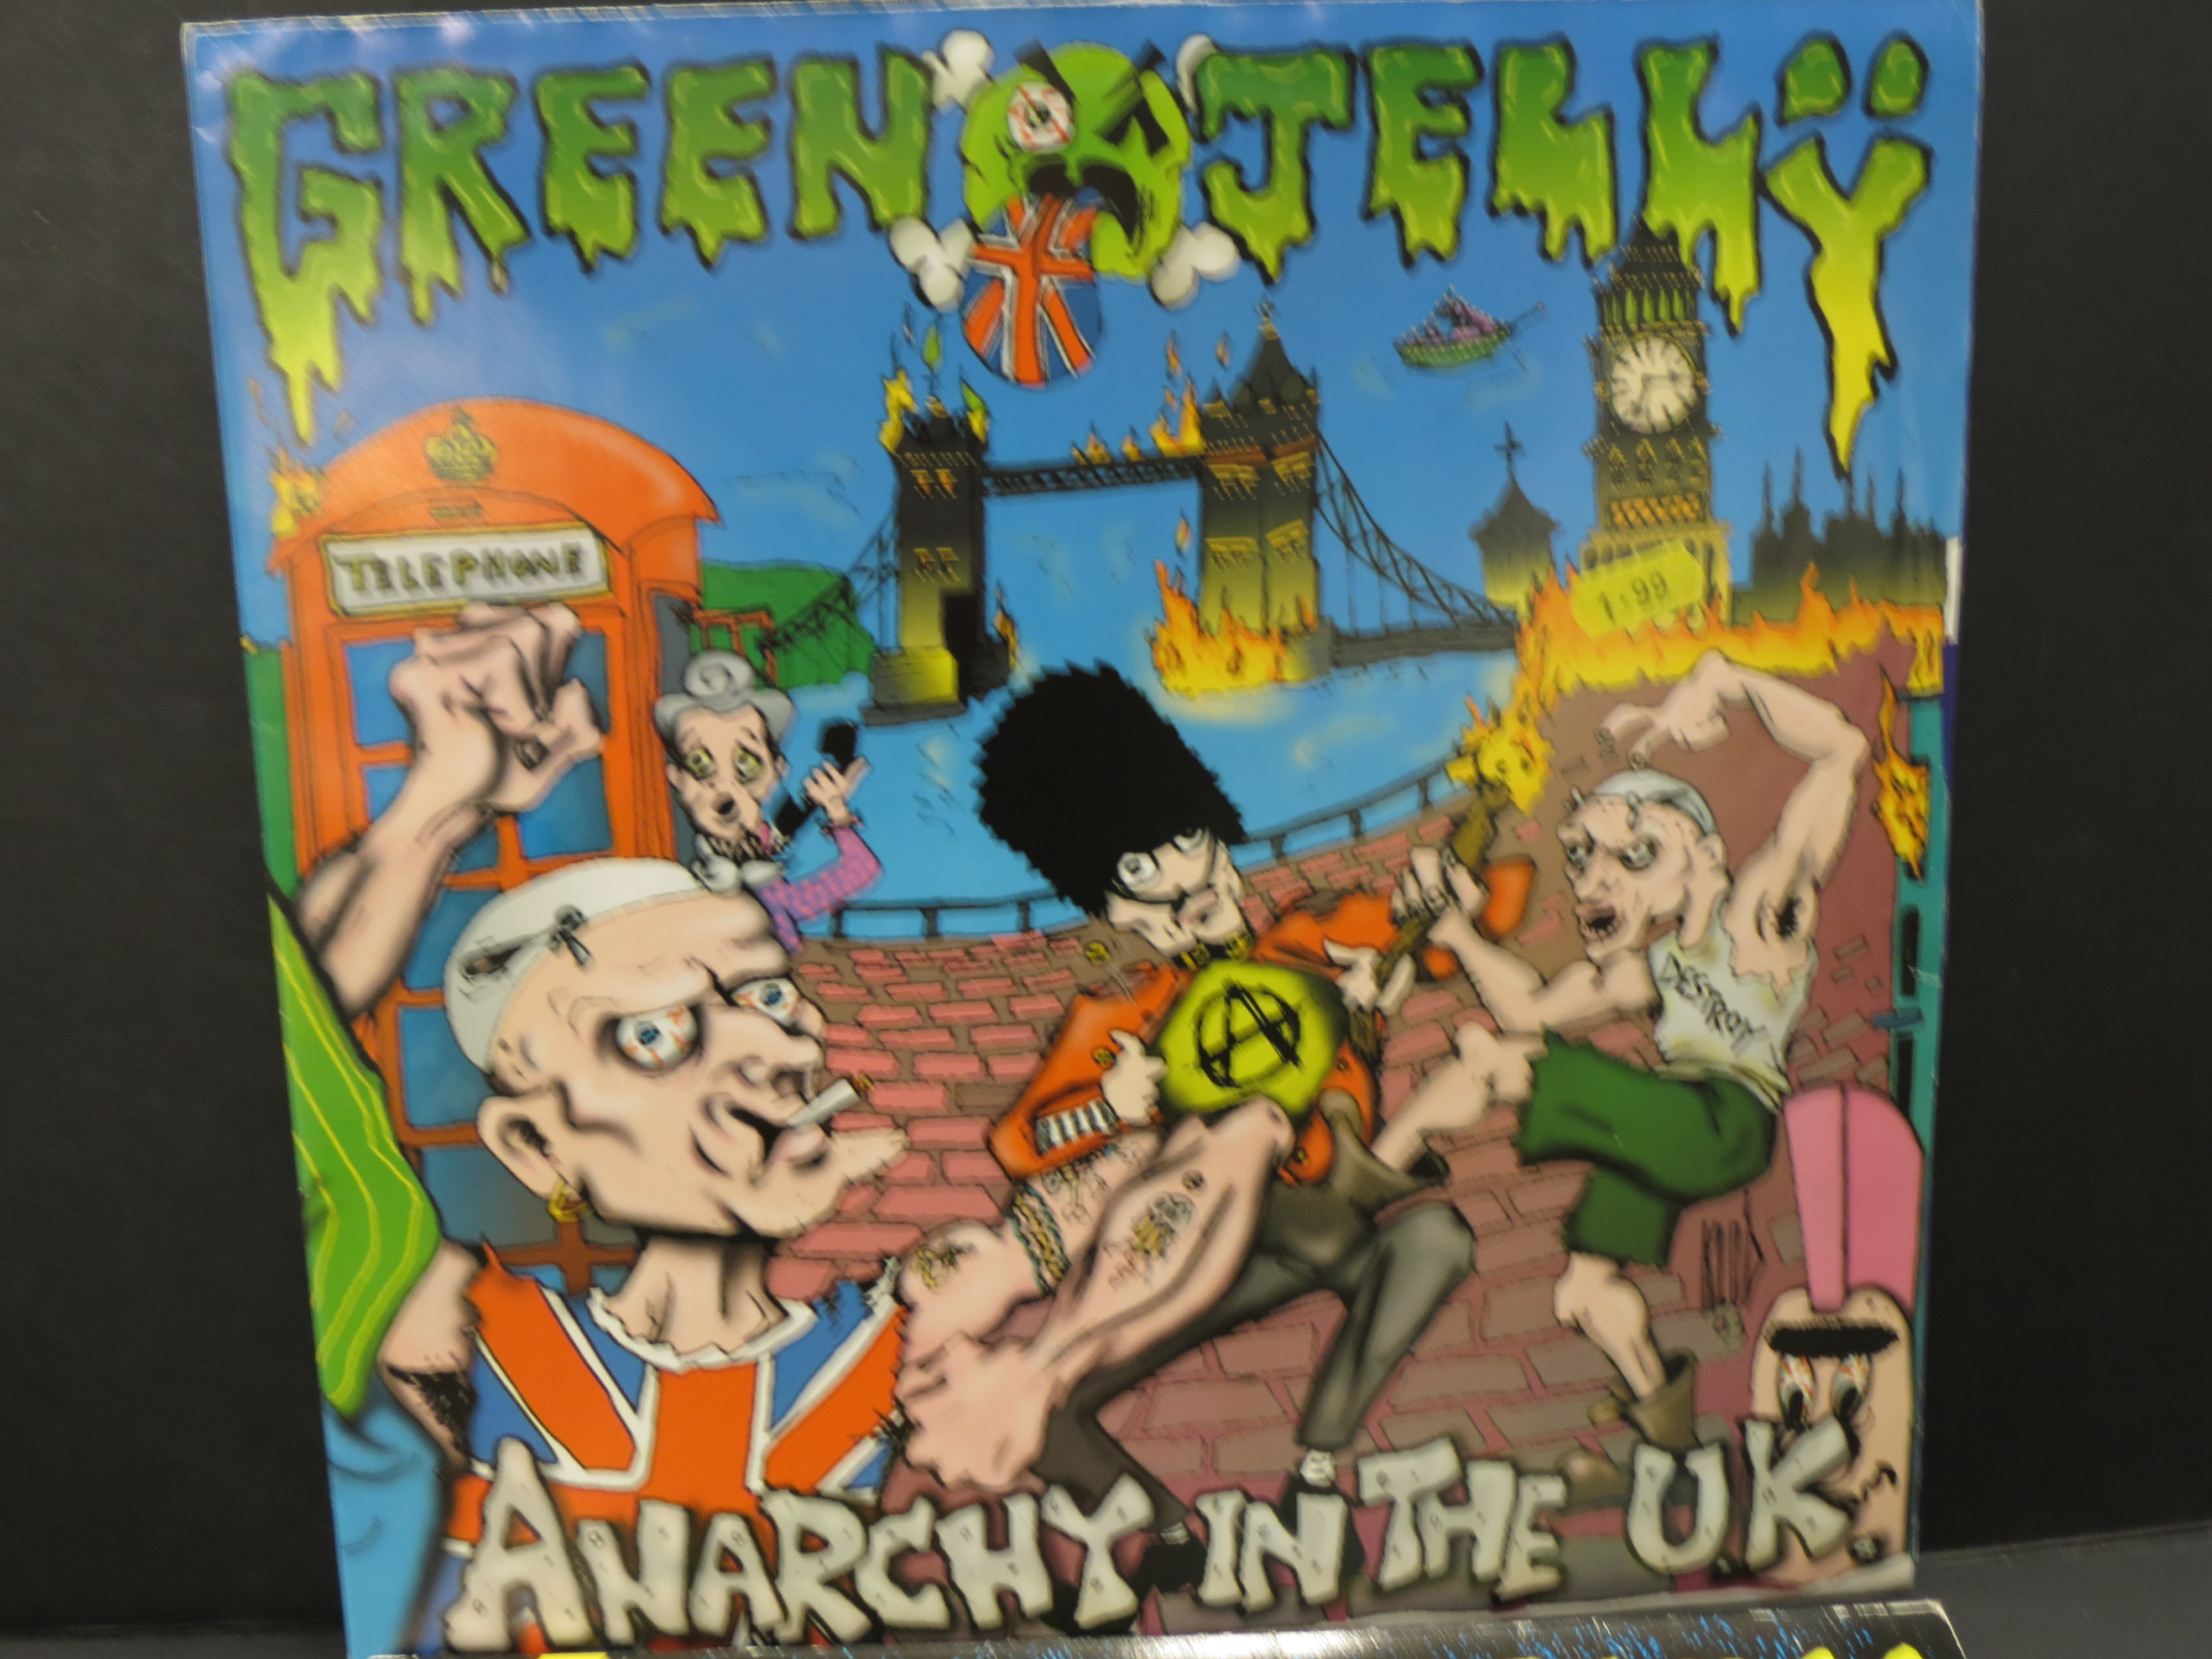 Vinyl - Green Jelly 1 LP and 1 12" single to include Cereal Killer Soundtrack (Zoo 7244511038 1) and - Image 3 of 3